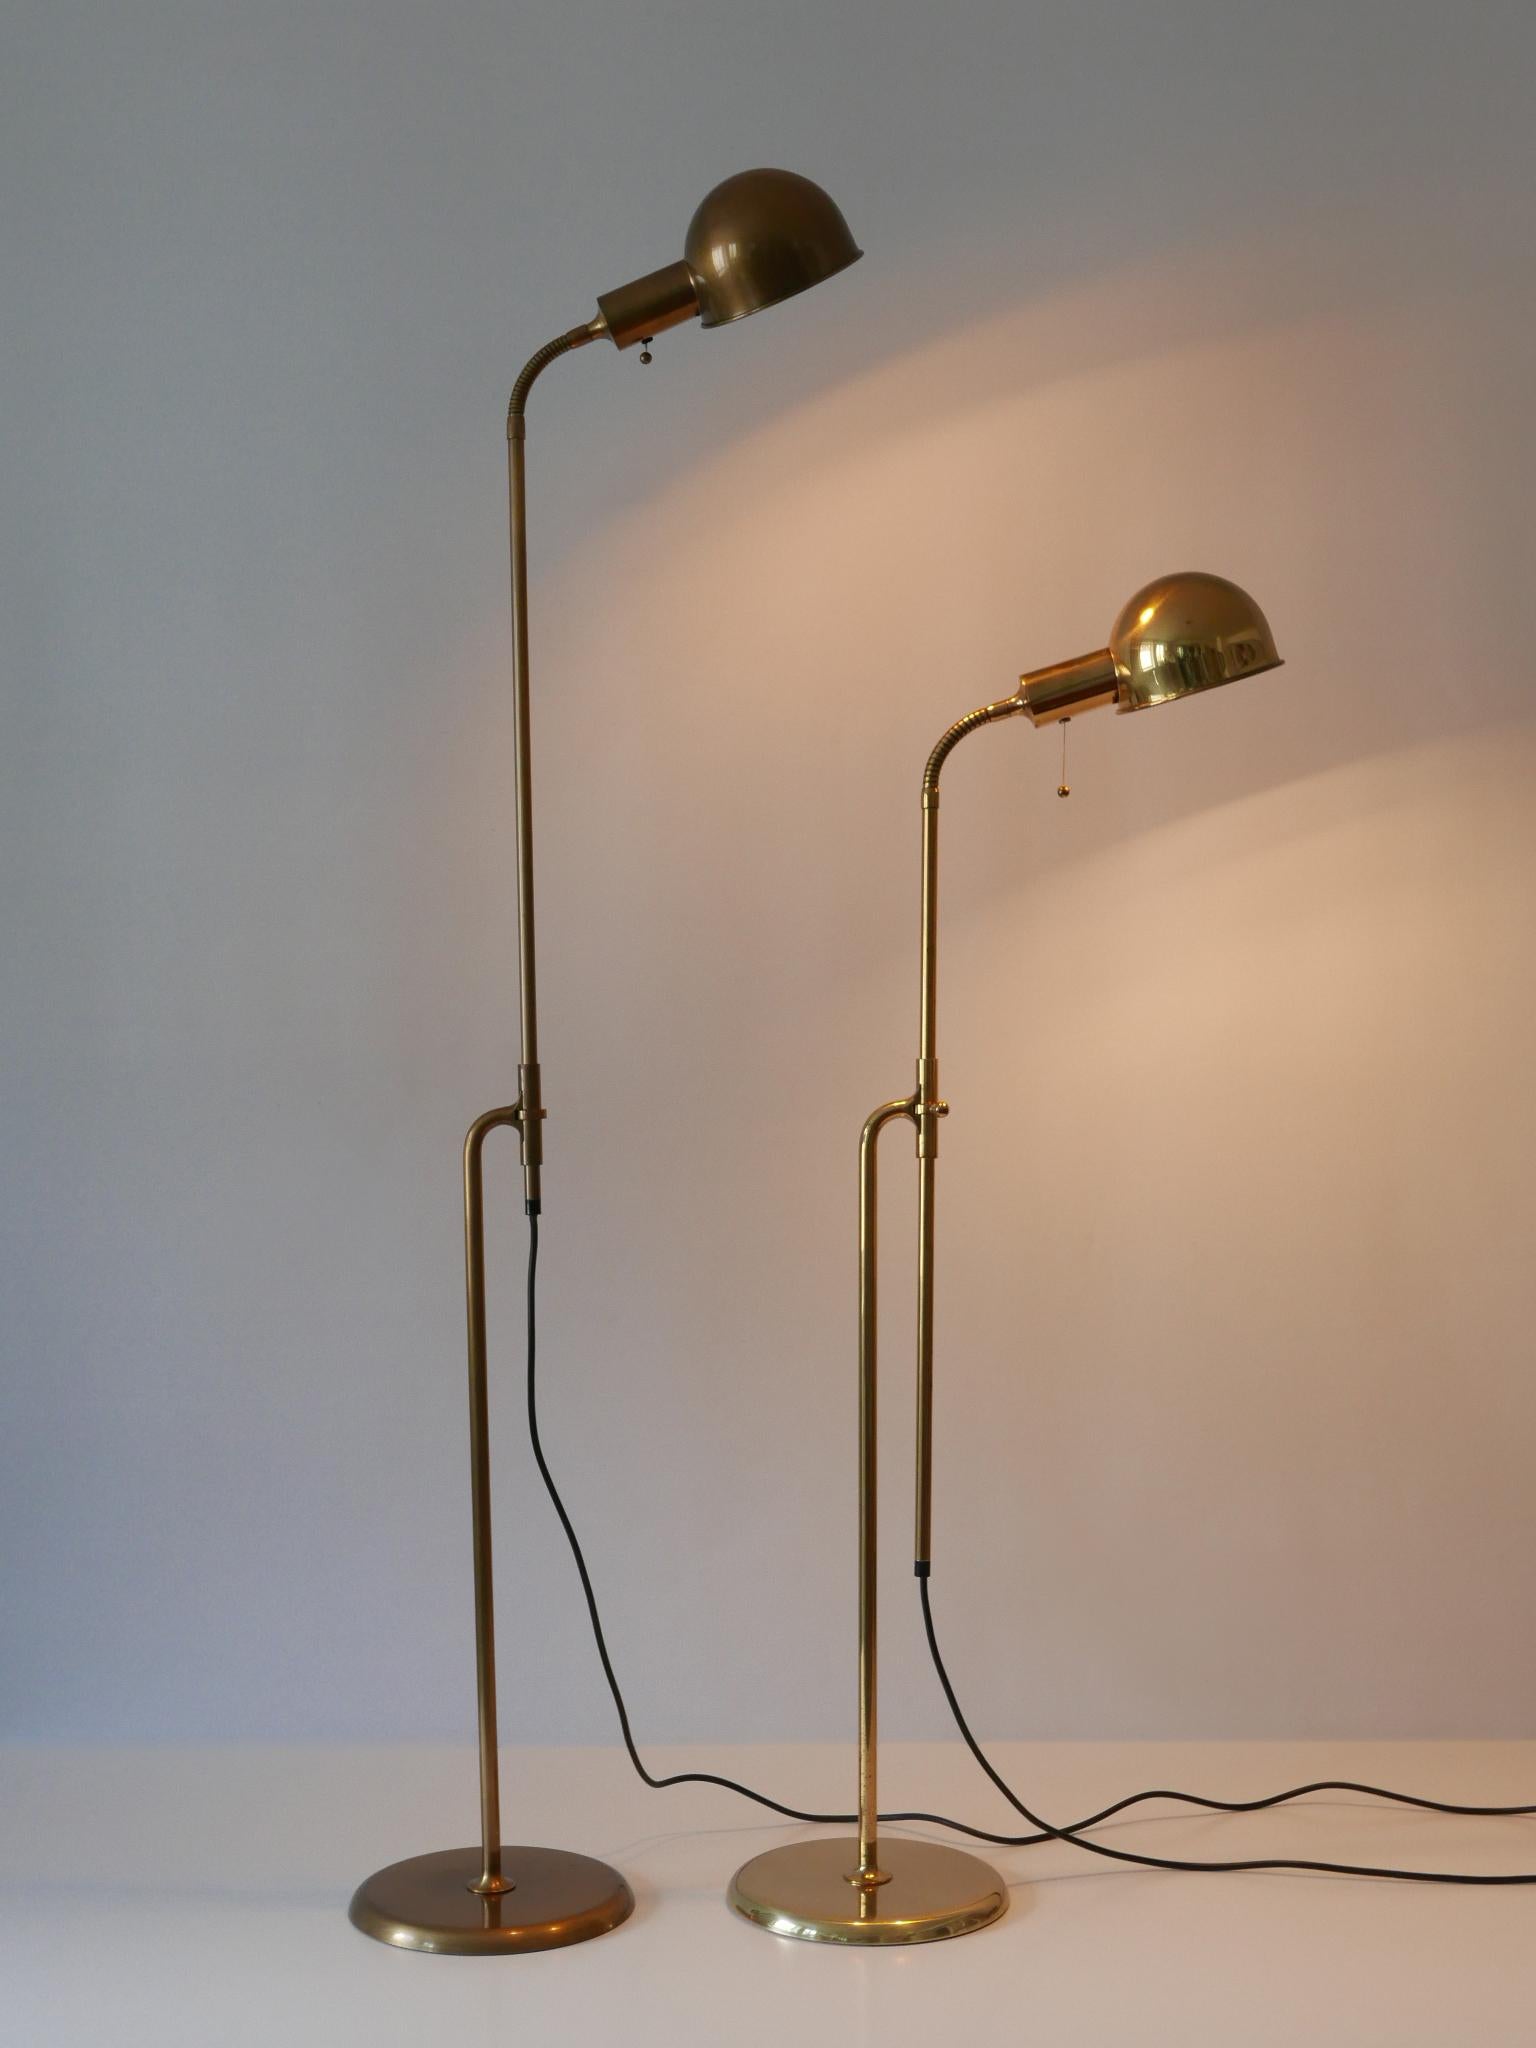 Set of Two Mid-Century Modern Reading Floor Lamps 'Bola' by Florian Schulz 1970s For Sale 3